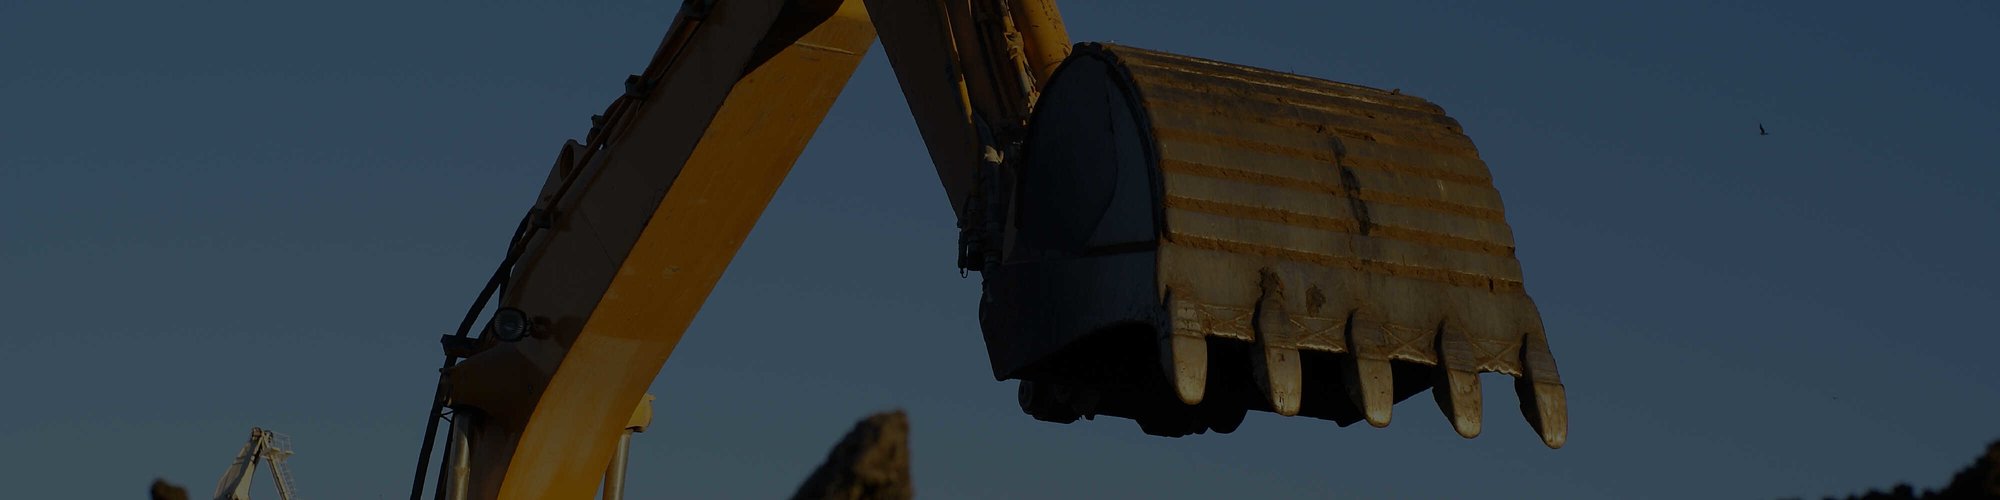 The arm of an excavator with a bucket attachment lifted into the air